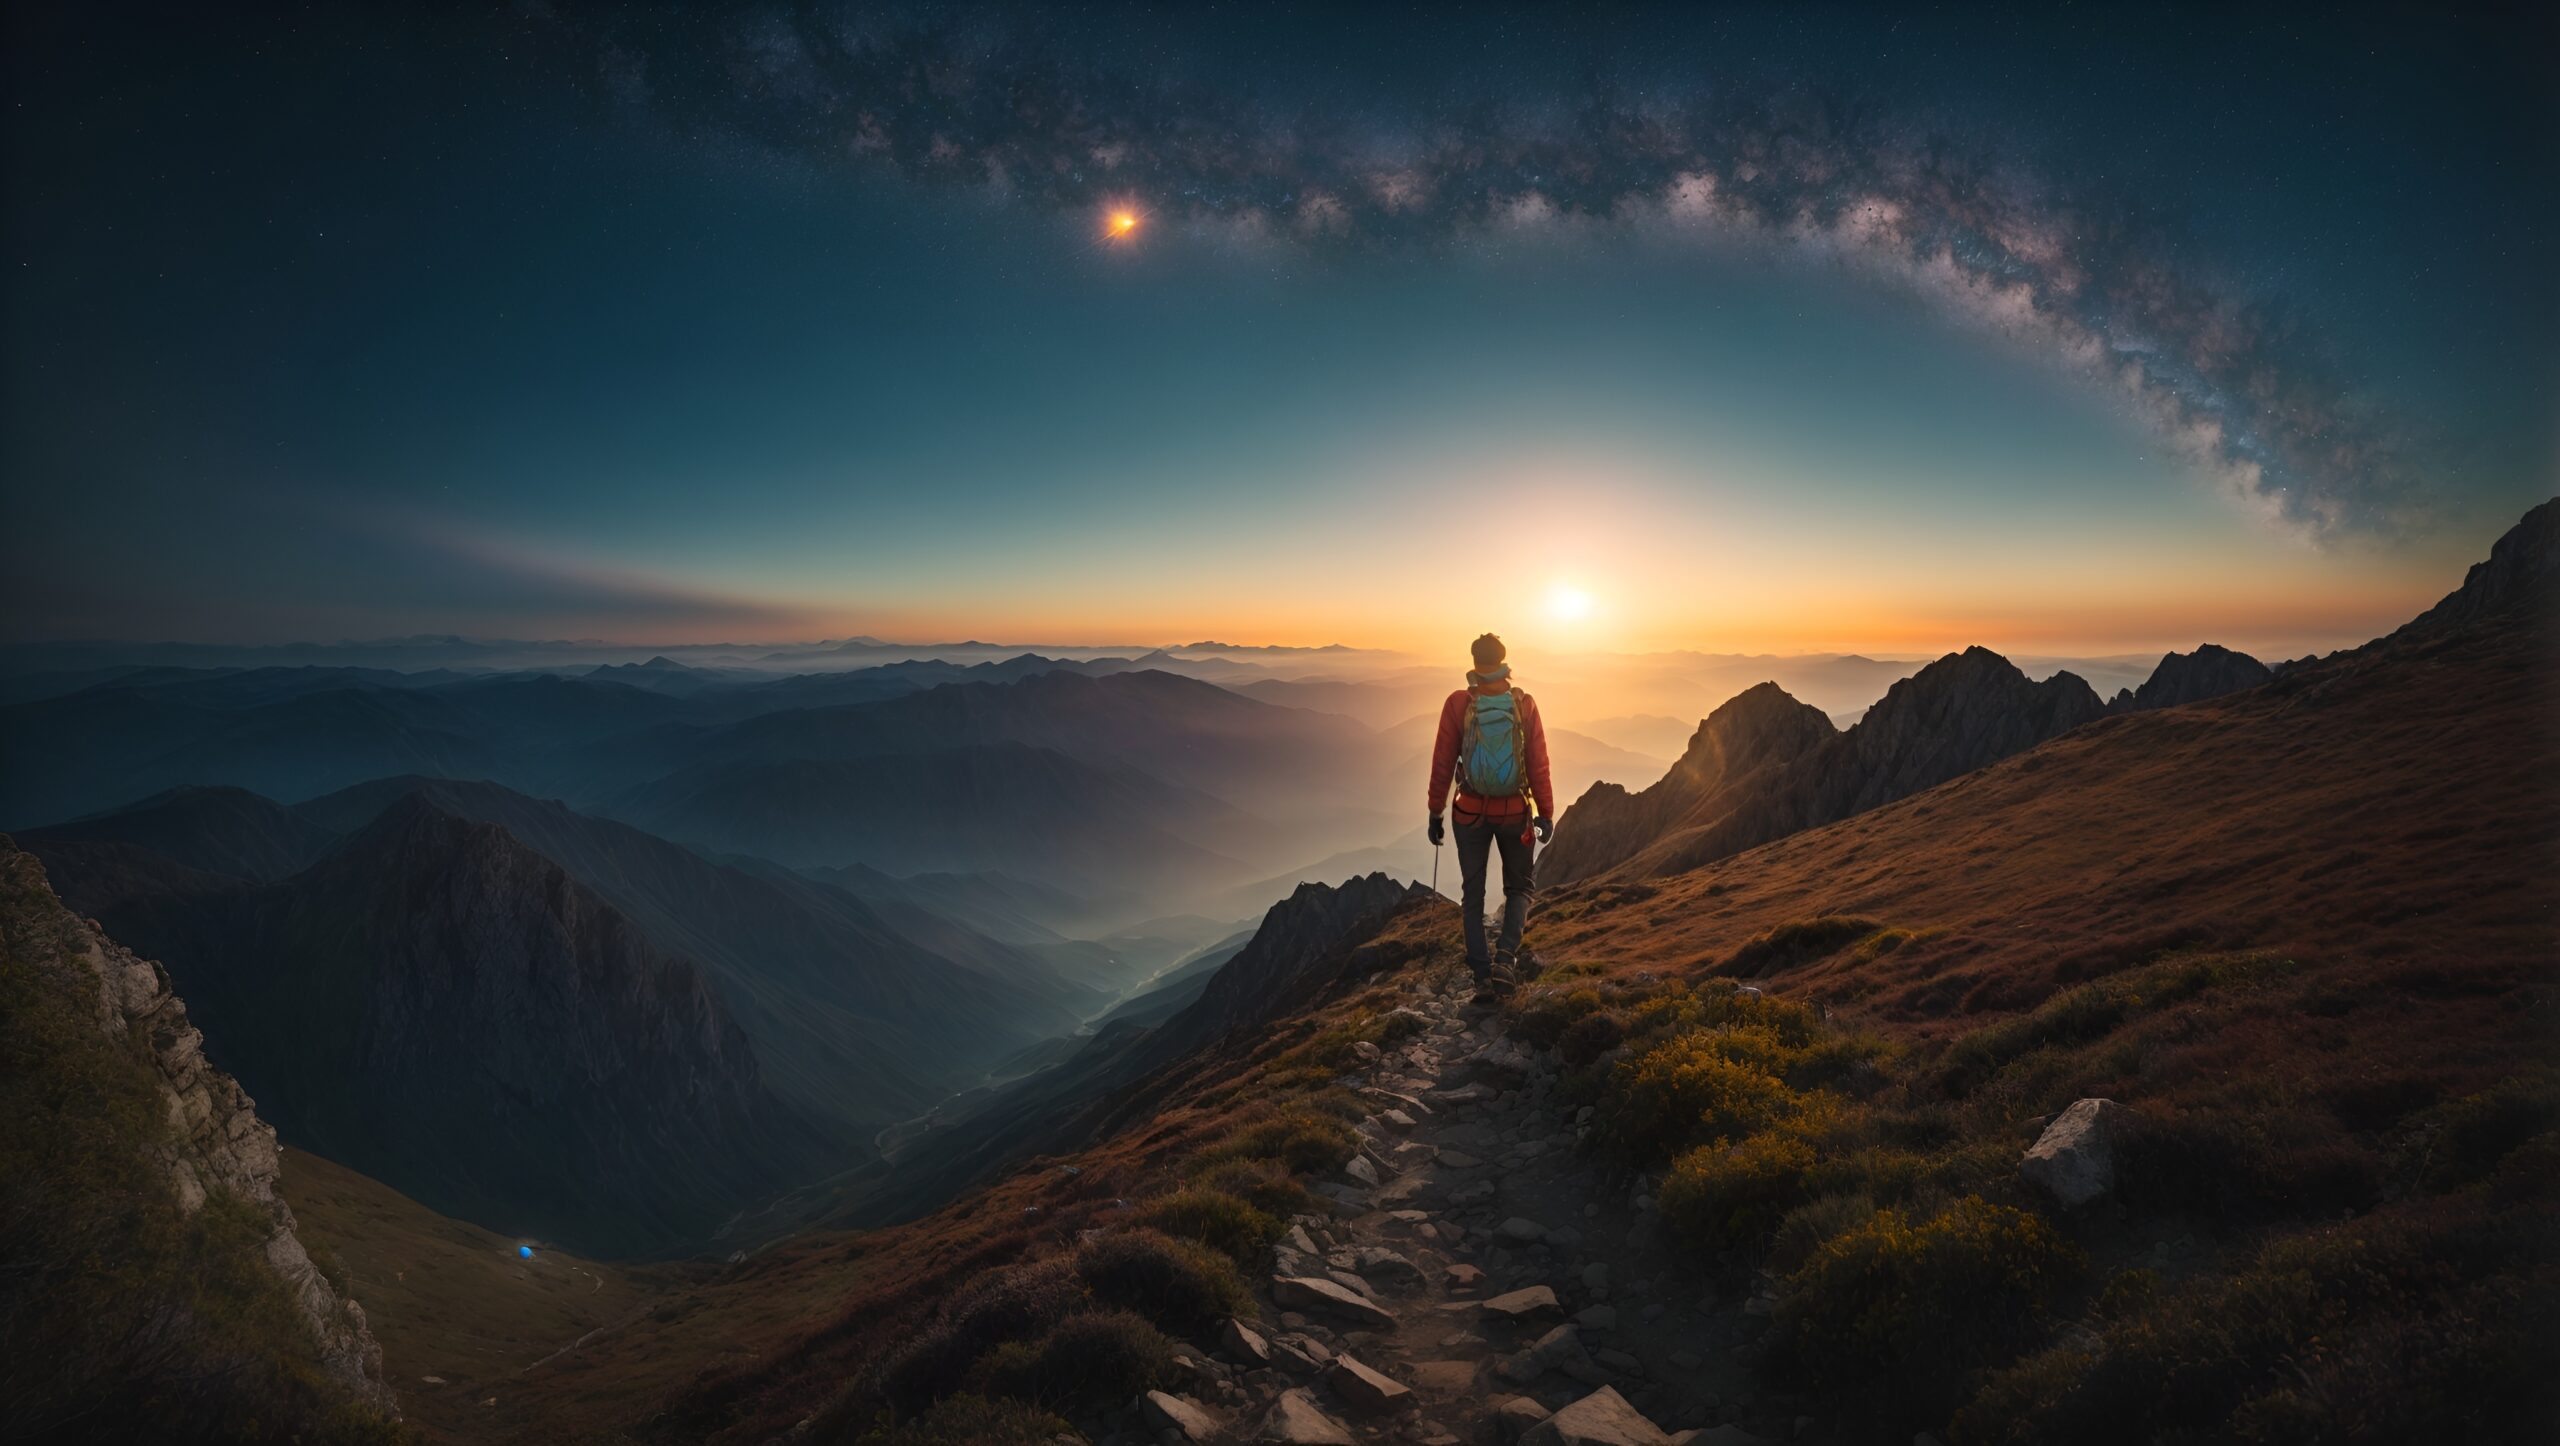 A hiker climbing a steep mountain path with various celestial bodies in the sky